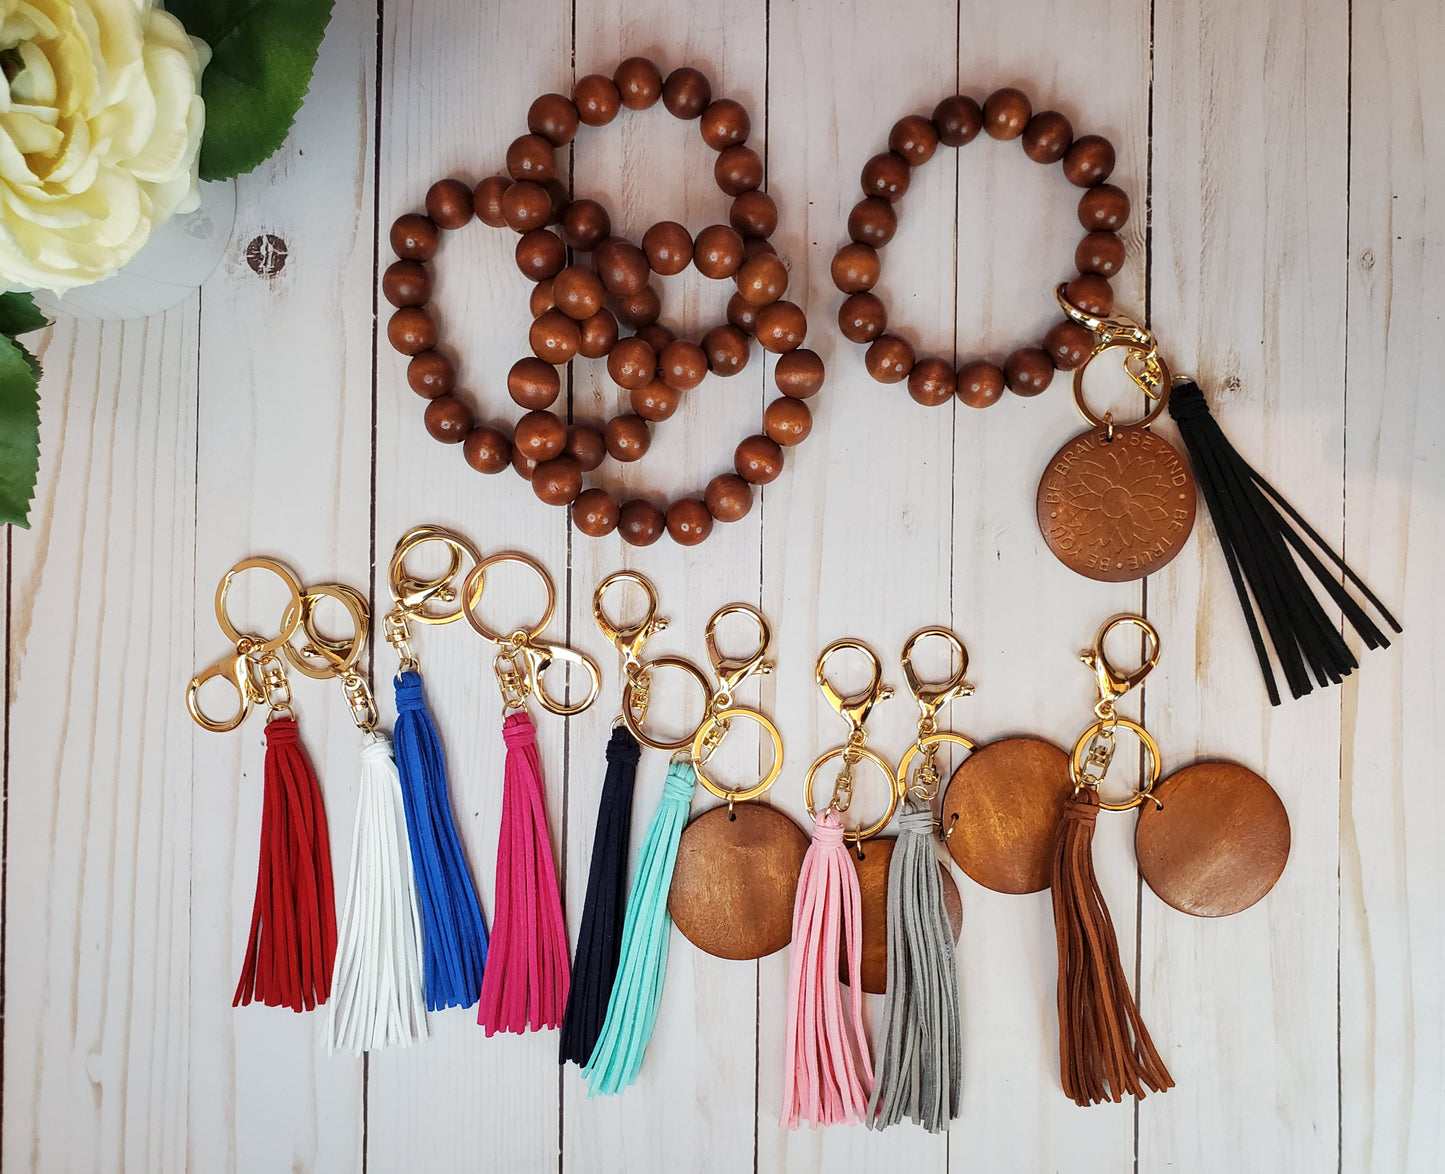 BYO wristlet, build your own keychain bracelet, wood disc with tassel, silicone or wood bead keychain bracelets, laser blanks, laser engraving blank